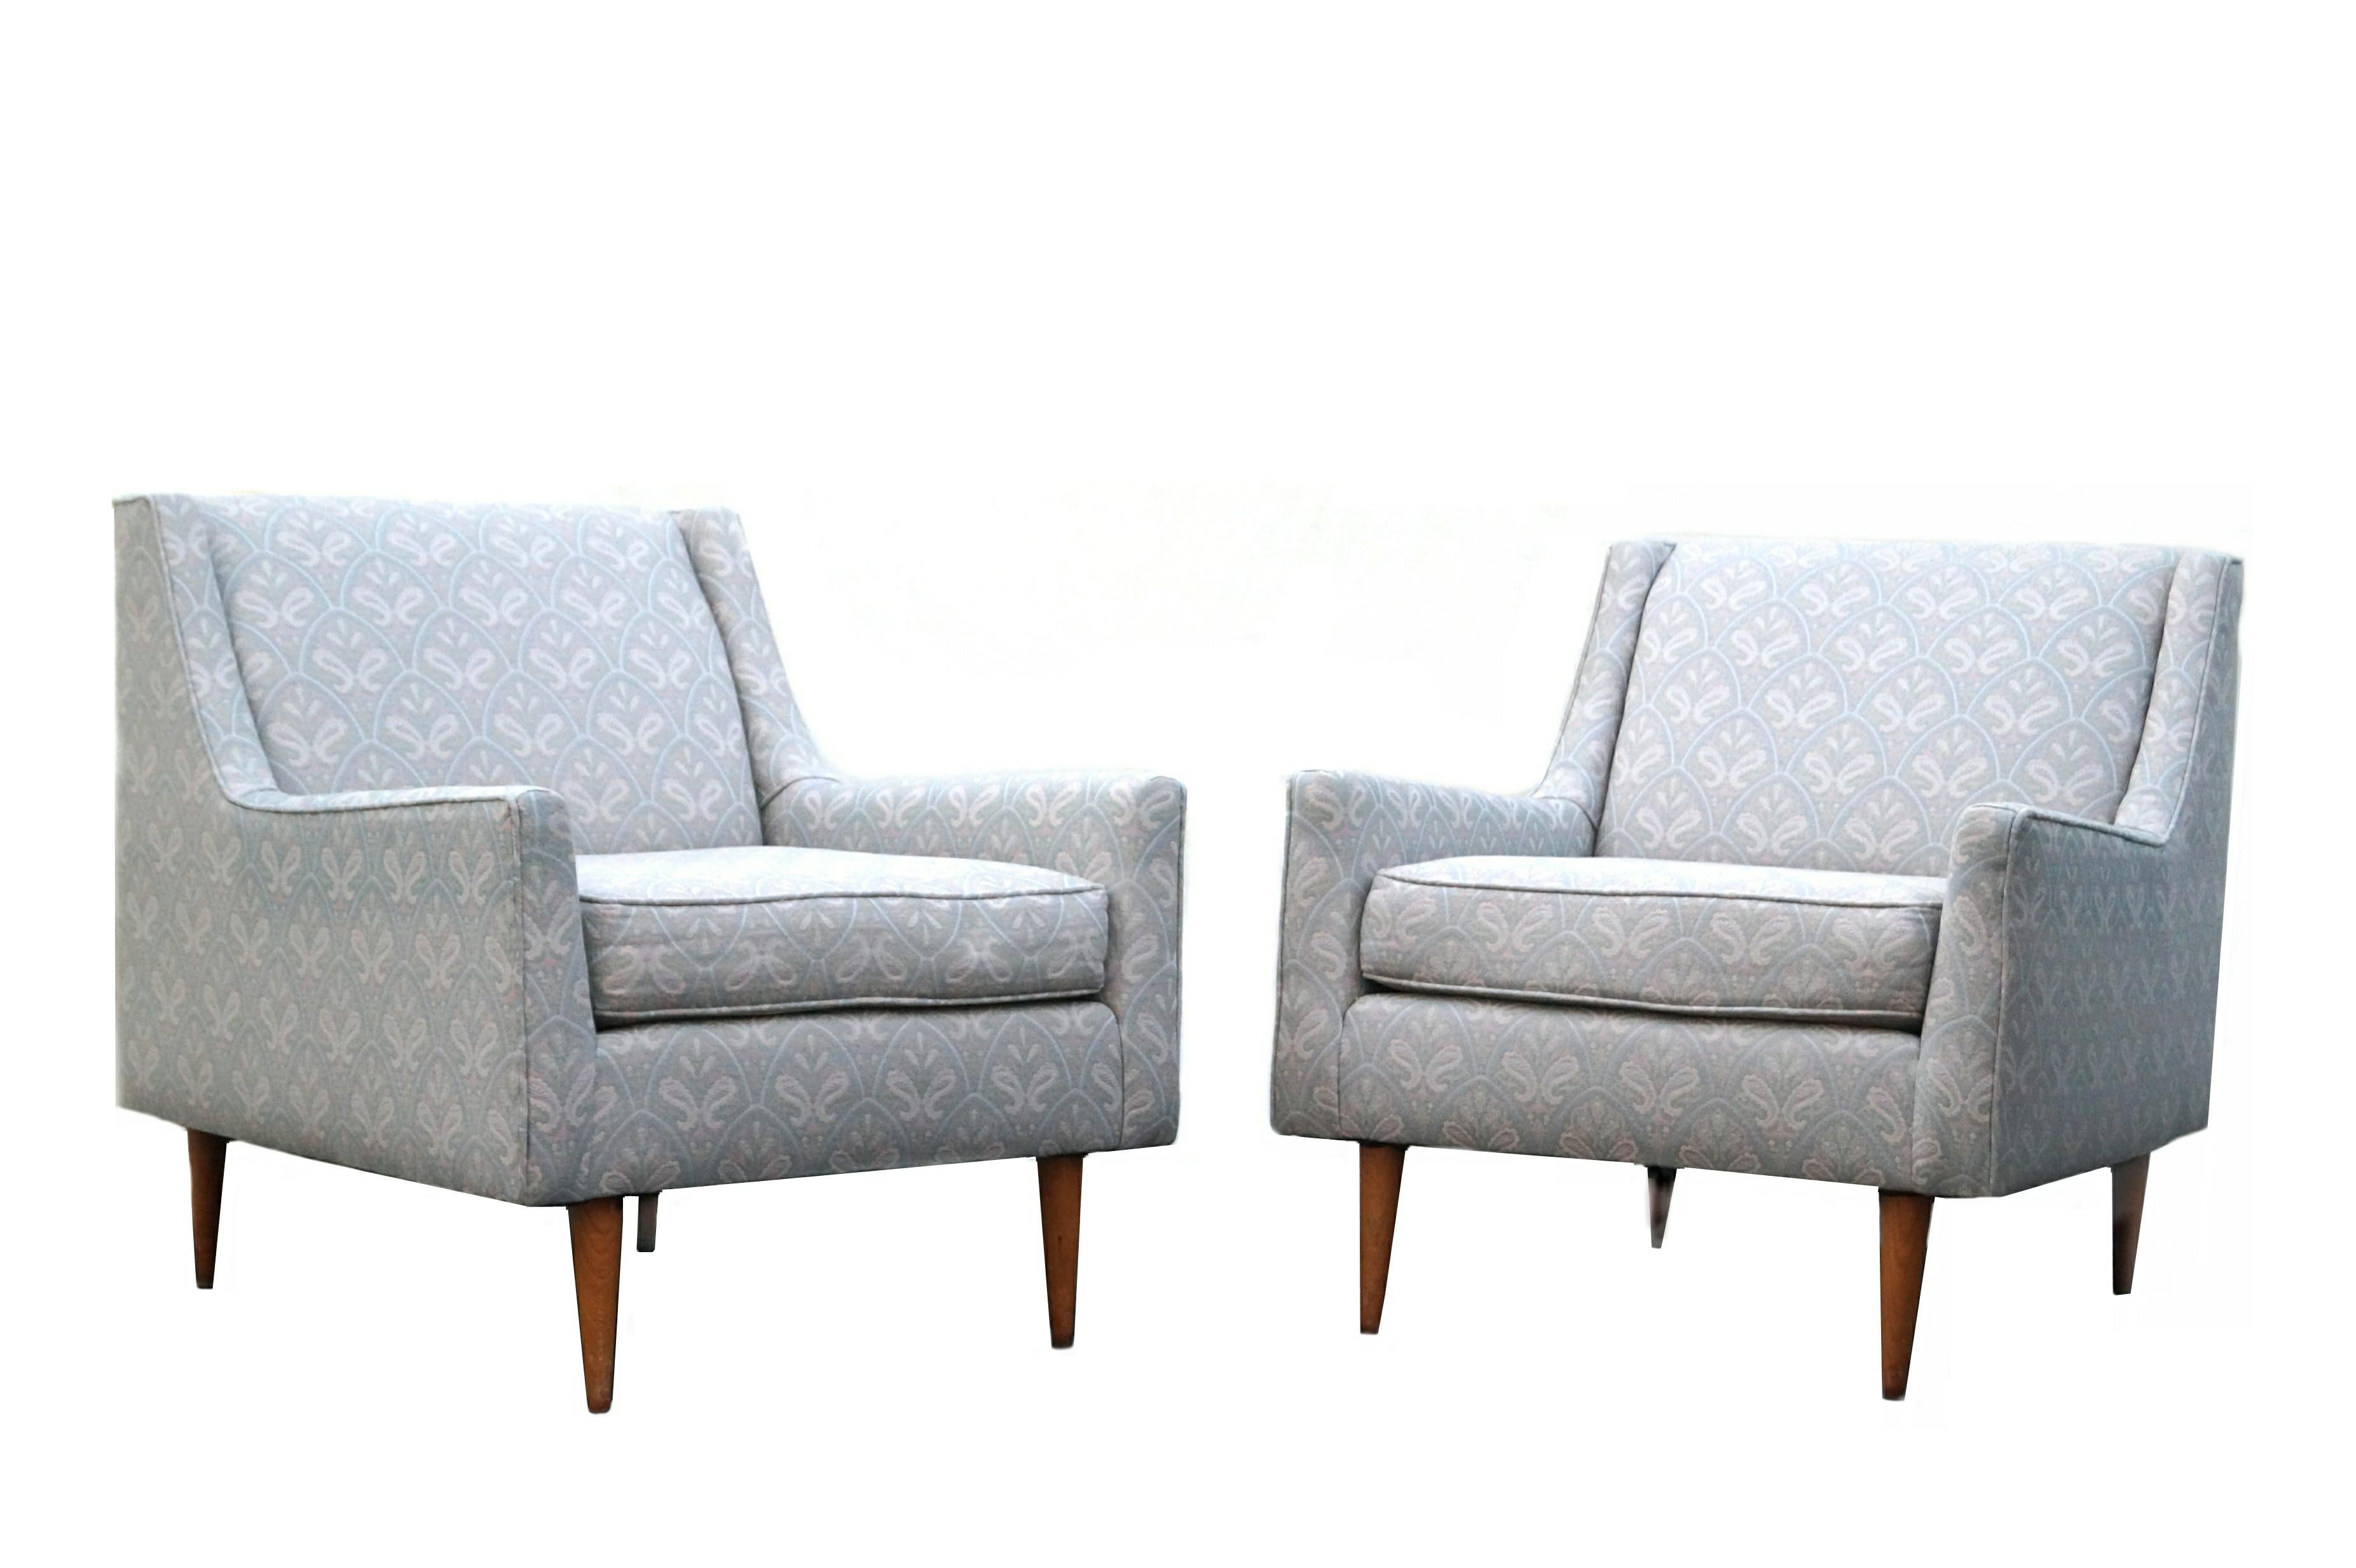 This is a pair of 1950's Mid-Century Modern lounge chairs that appear to have been reupholstered in the 1970's They are in the Manner of Edward Wormley. Not marked or signed, as they were reupholstered.
If you are in the New Jersey , New York City